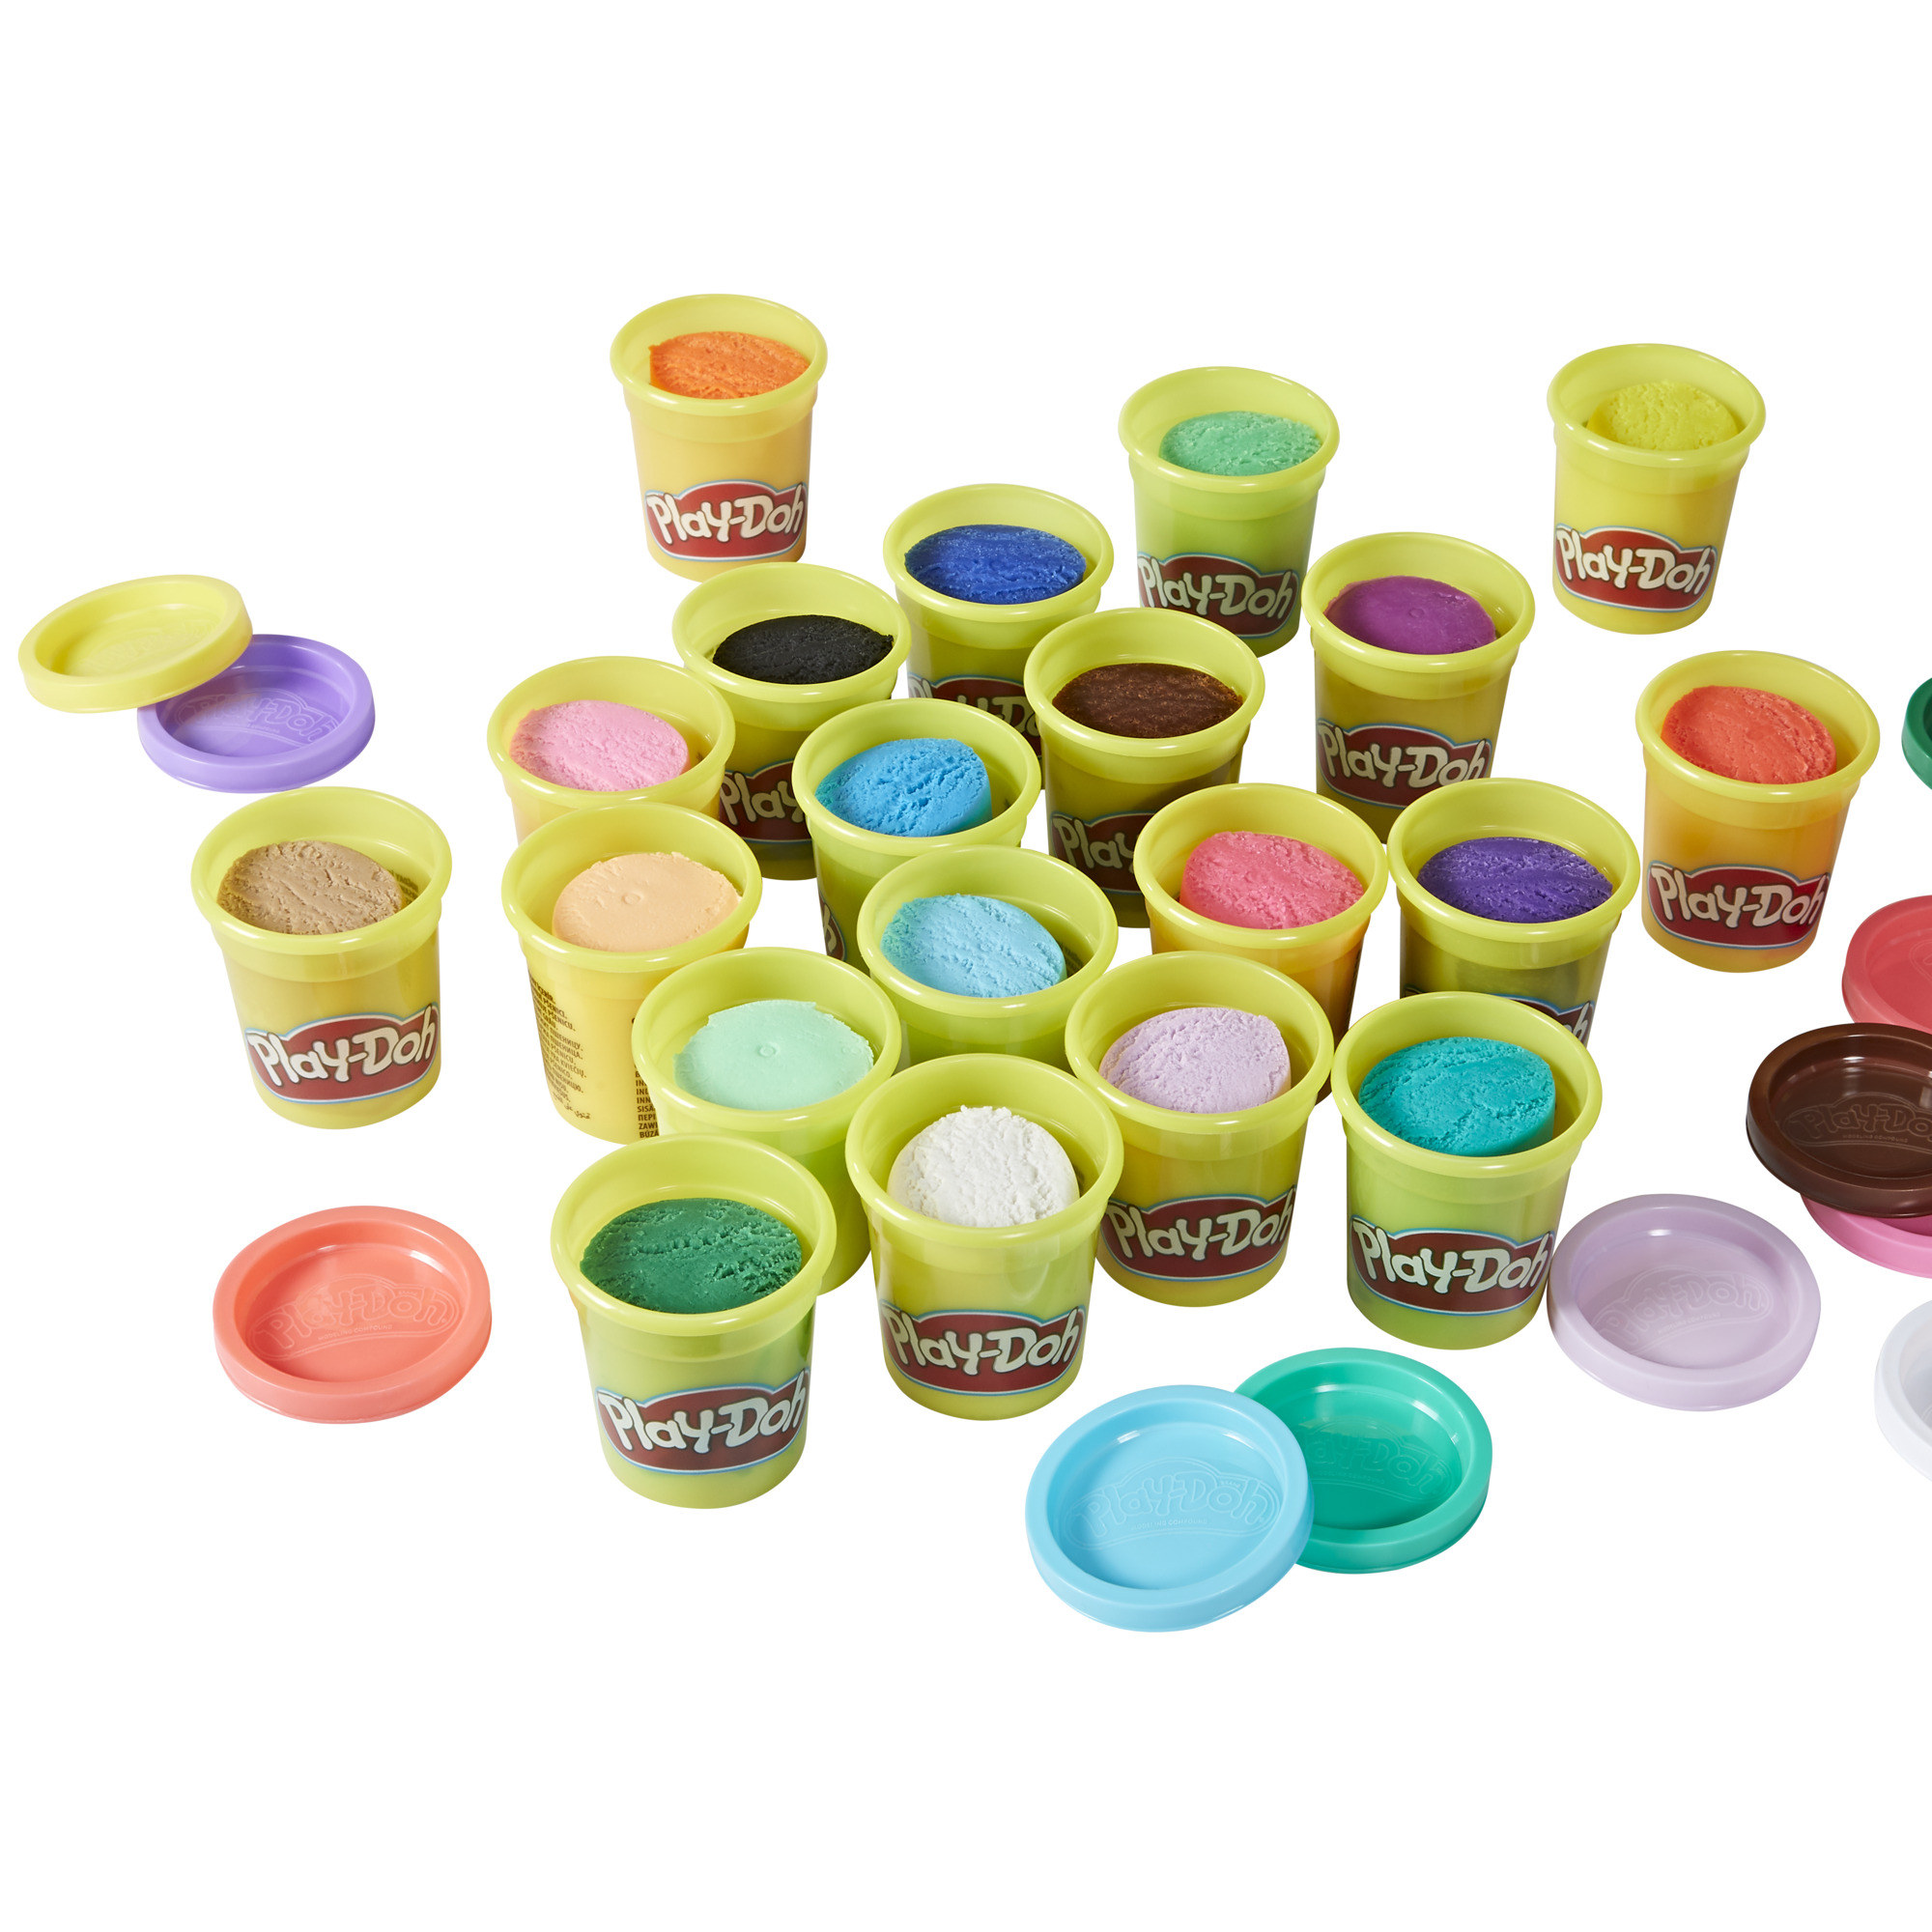 Play-Doh Multicolor Magic Play Dough Set - 20 Color (20 Piece), Only At Walmart - image 3 of 5